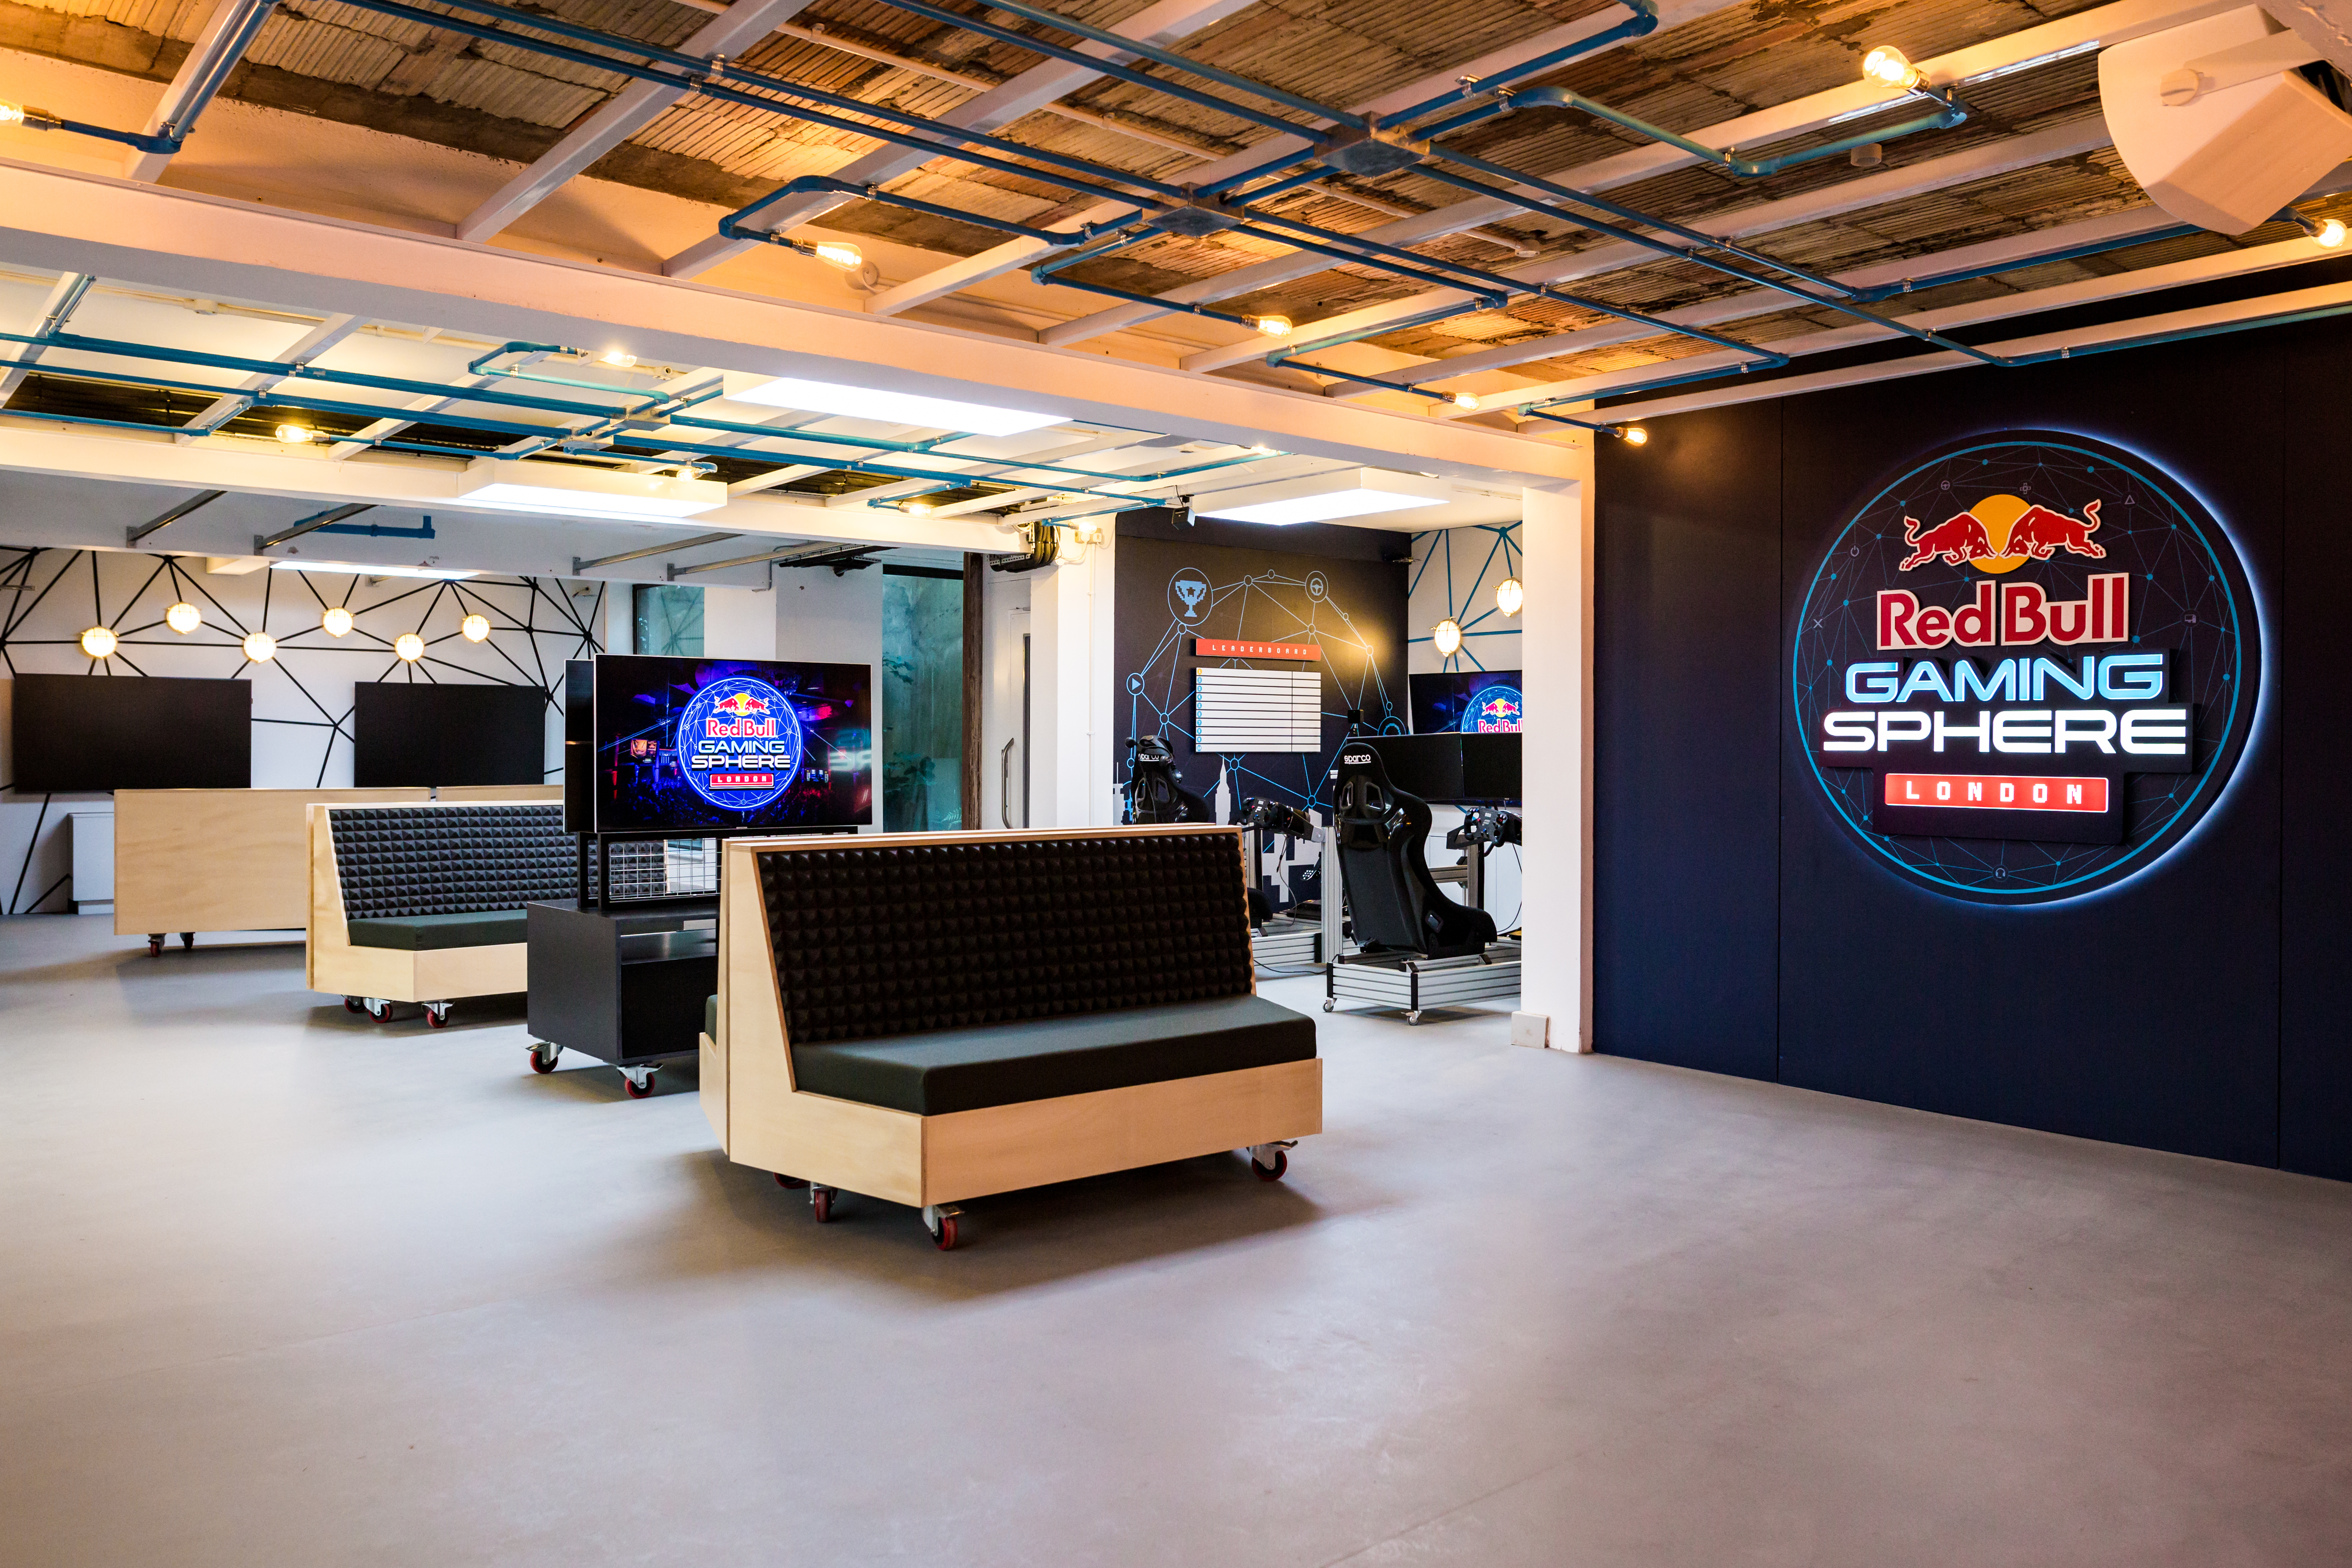 Finds its Home in the Red Bull Gaming Sphere, the Largest Public Studio the UK | Business Wire